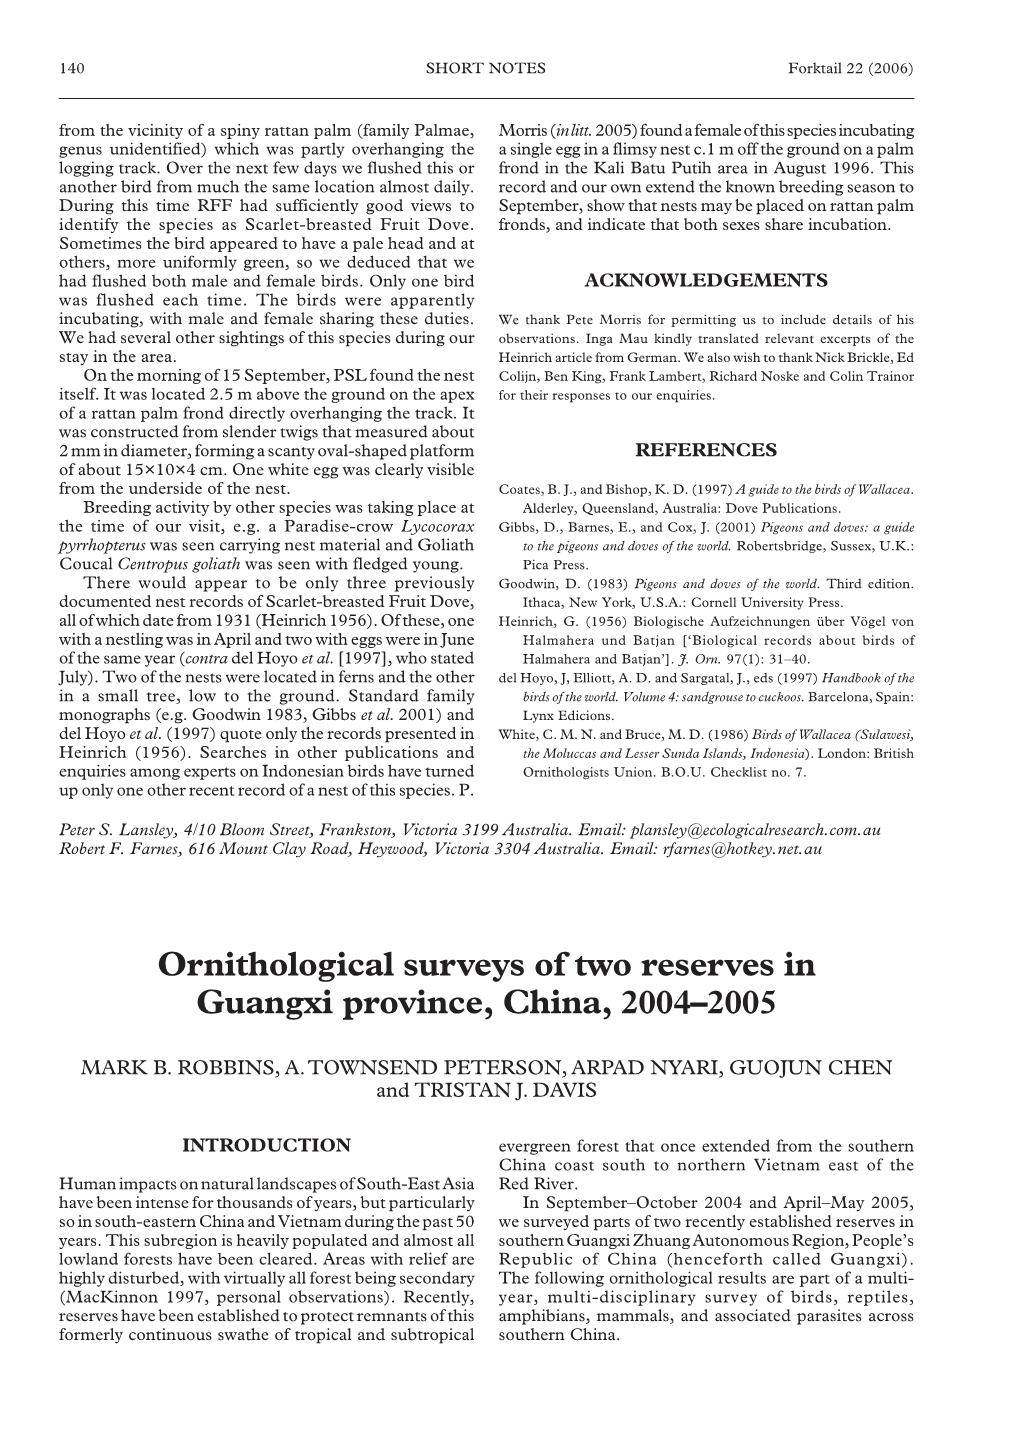 Ornithological Surveys of Two Reserves in Guangxi Province, China, 2004–2005